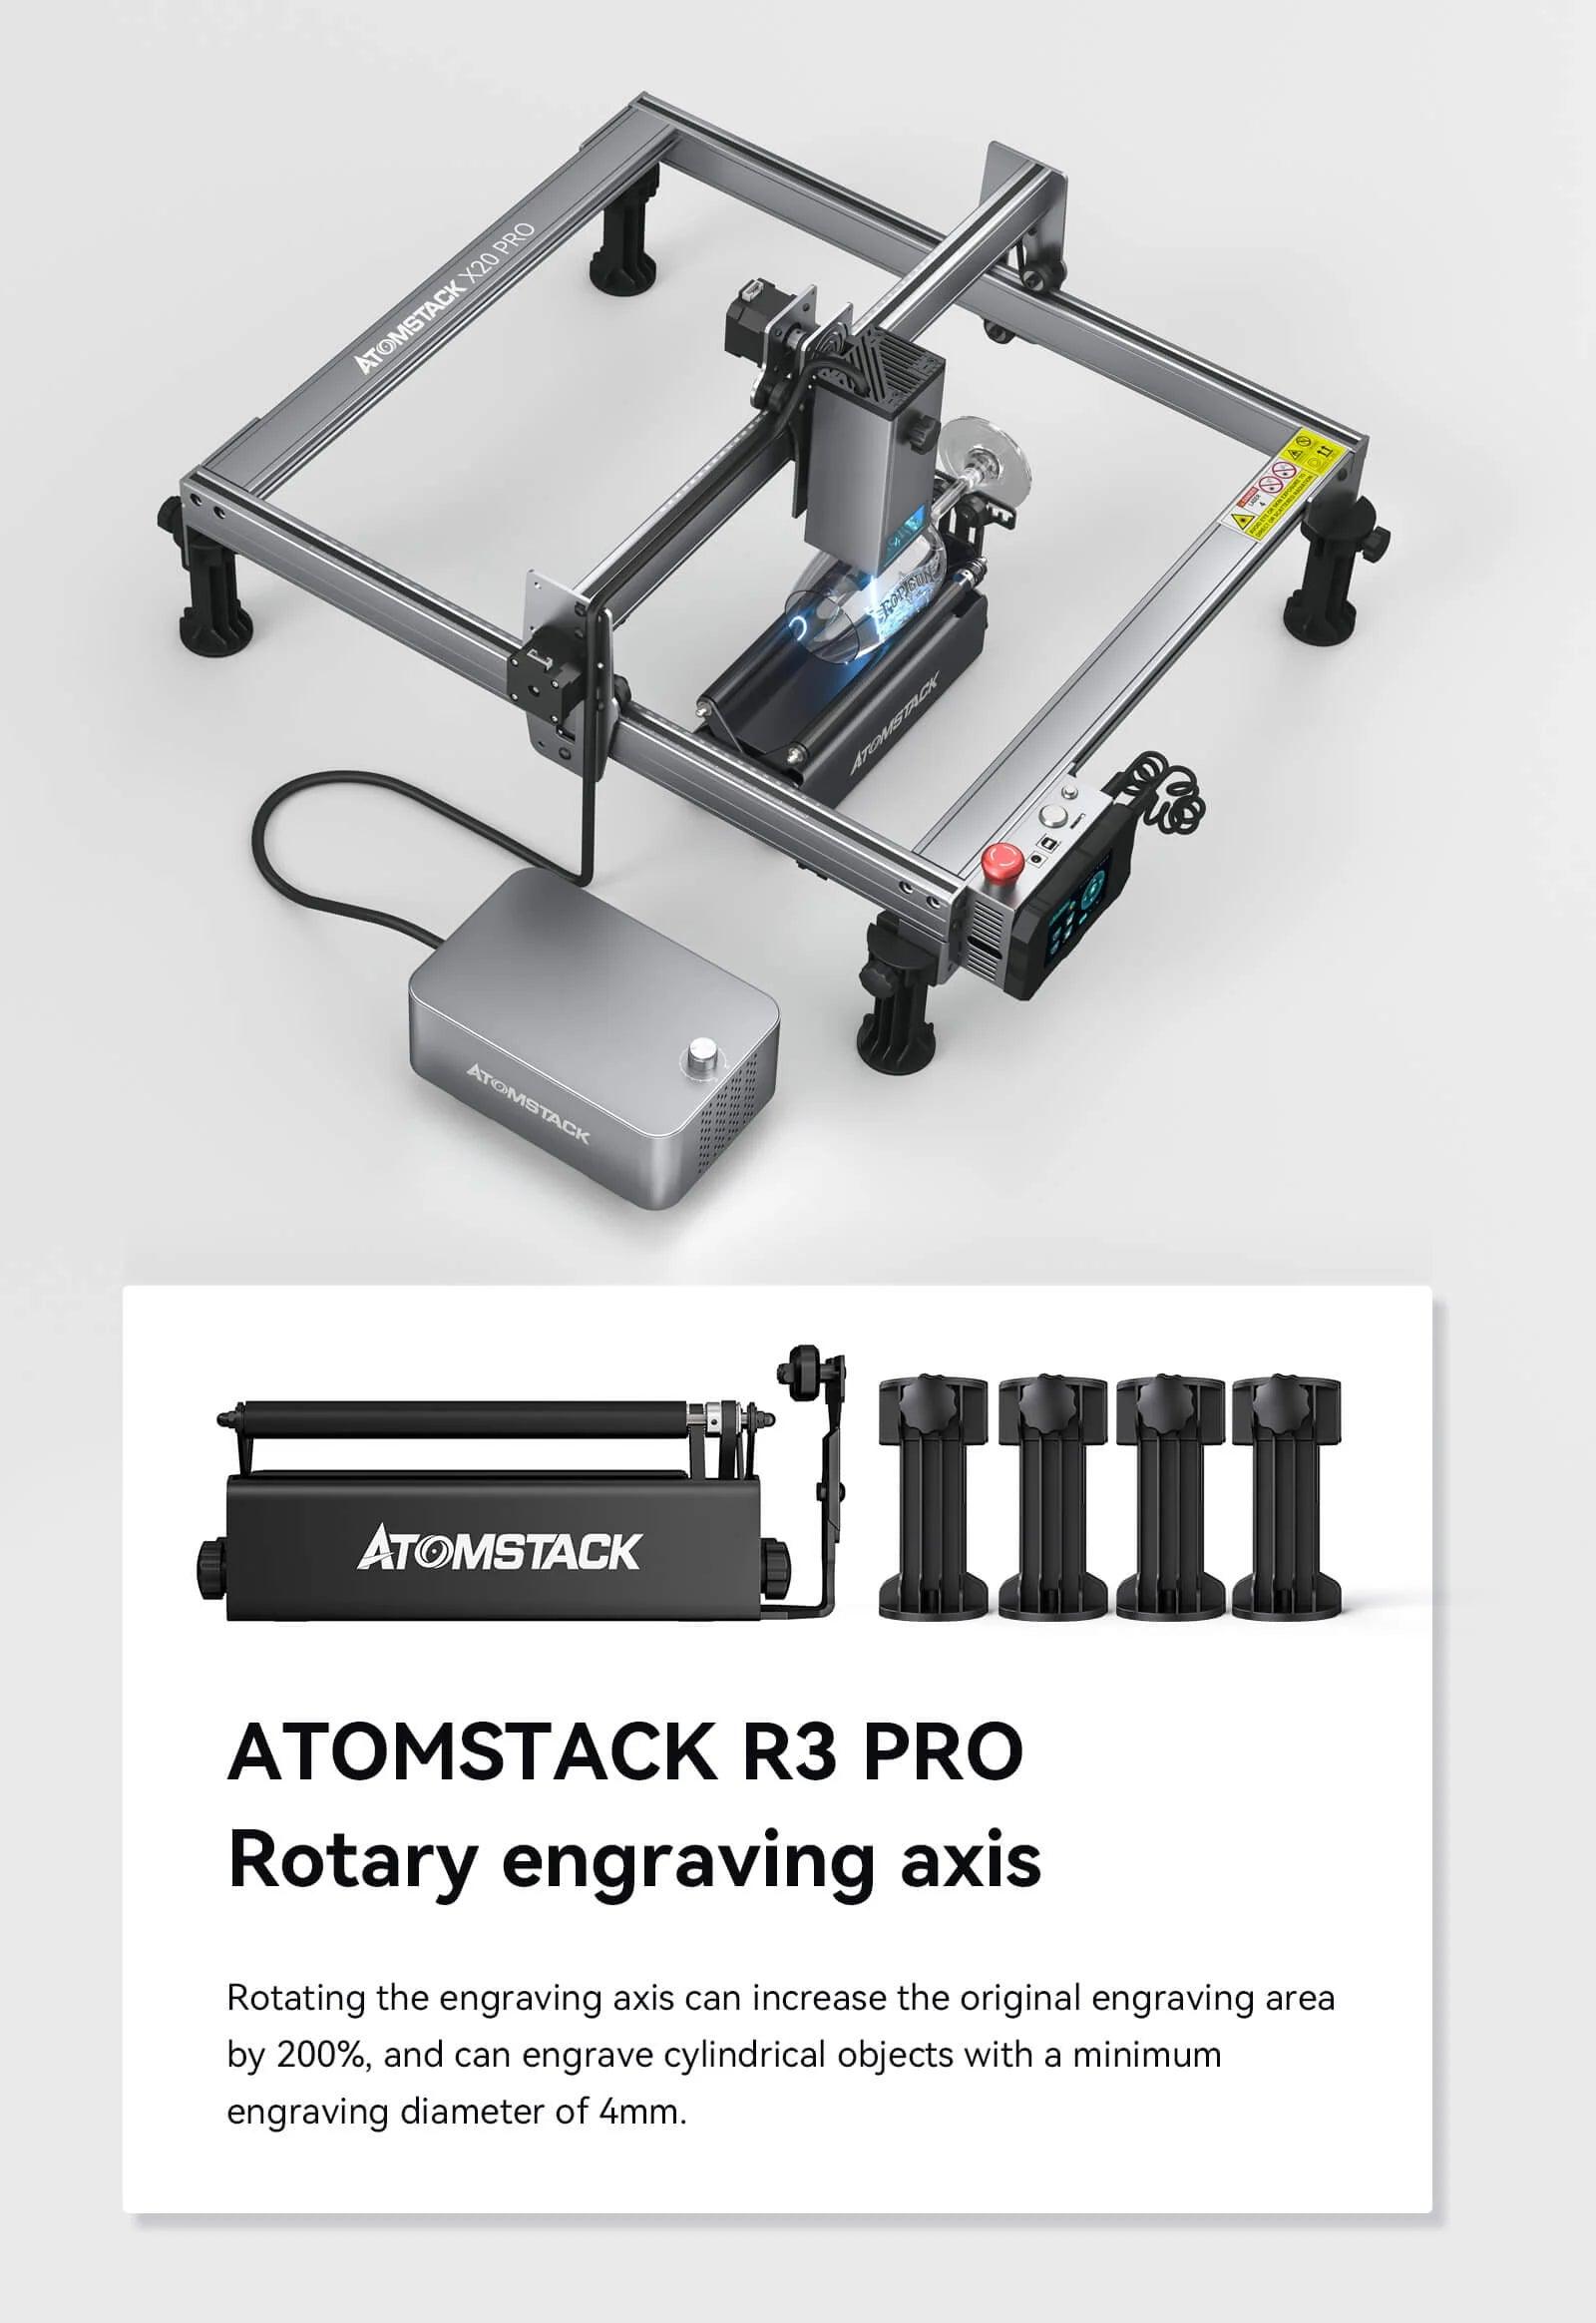 Atomstack X20 Pro 130W Quad-Laser Engraving And Cutting Machine Built-In Air Assist System - Antinsky3d